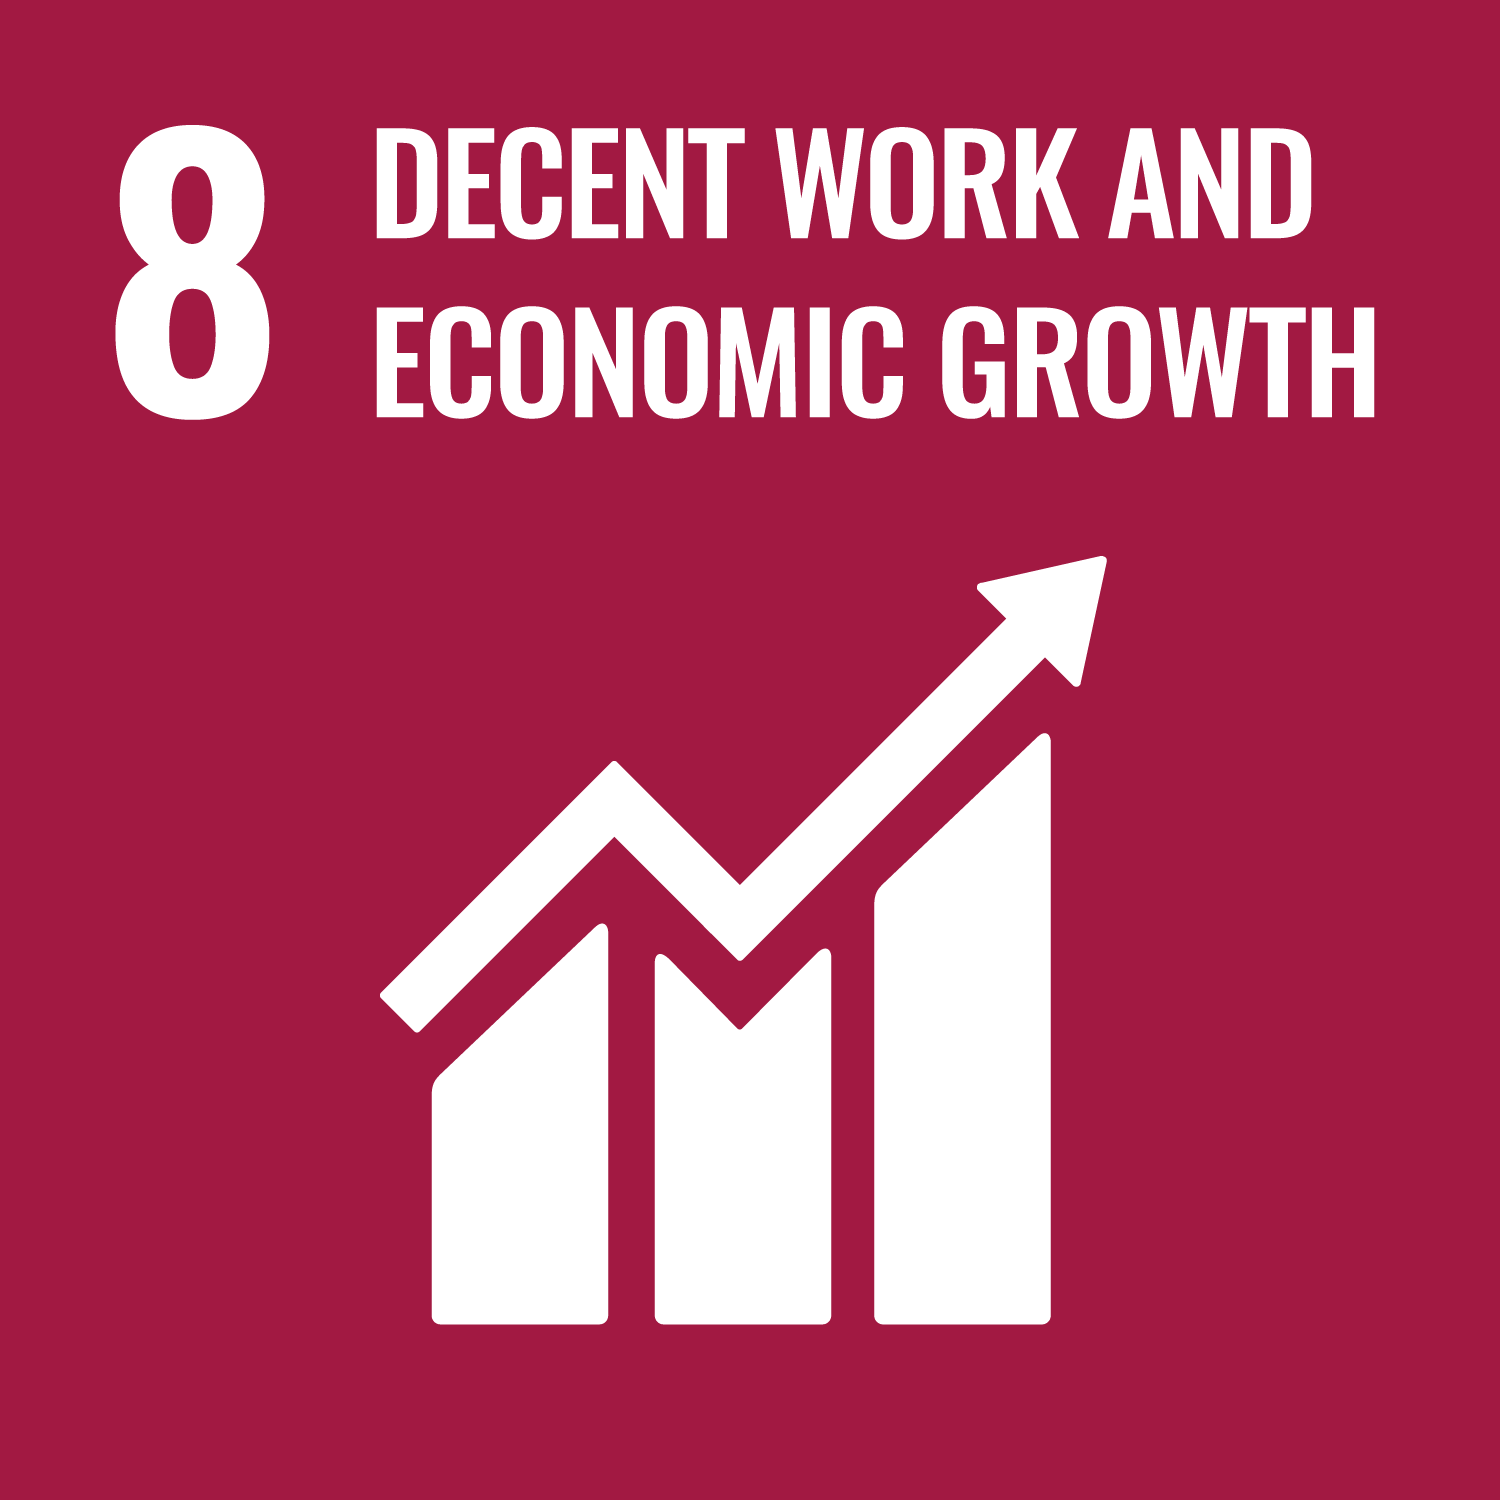 SDG 8: Promote inclusive and sustainable economic growth, employment and decent work for all